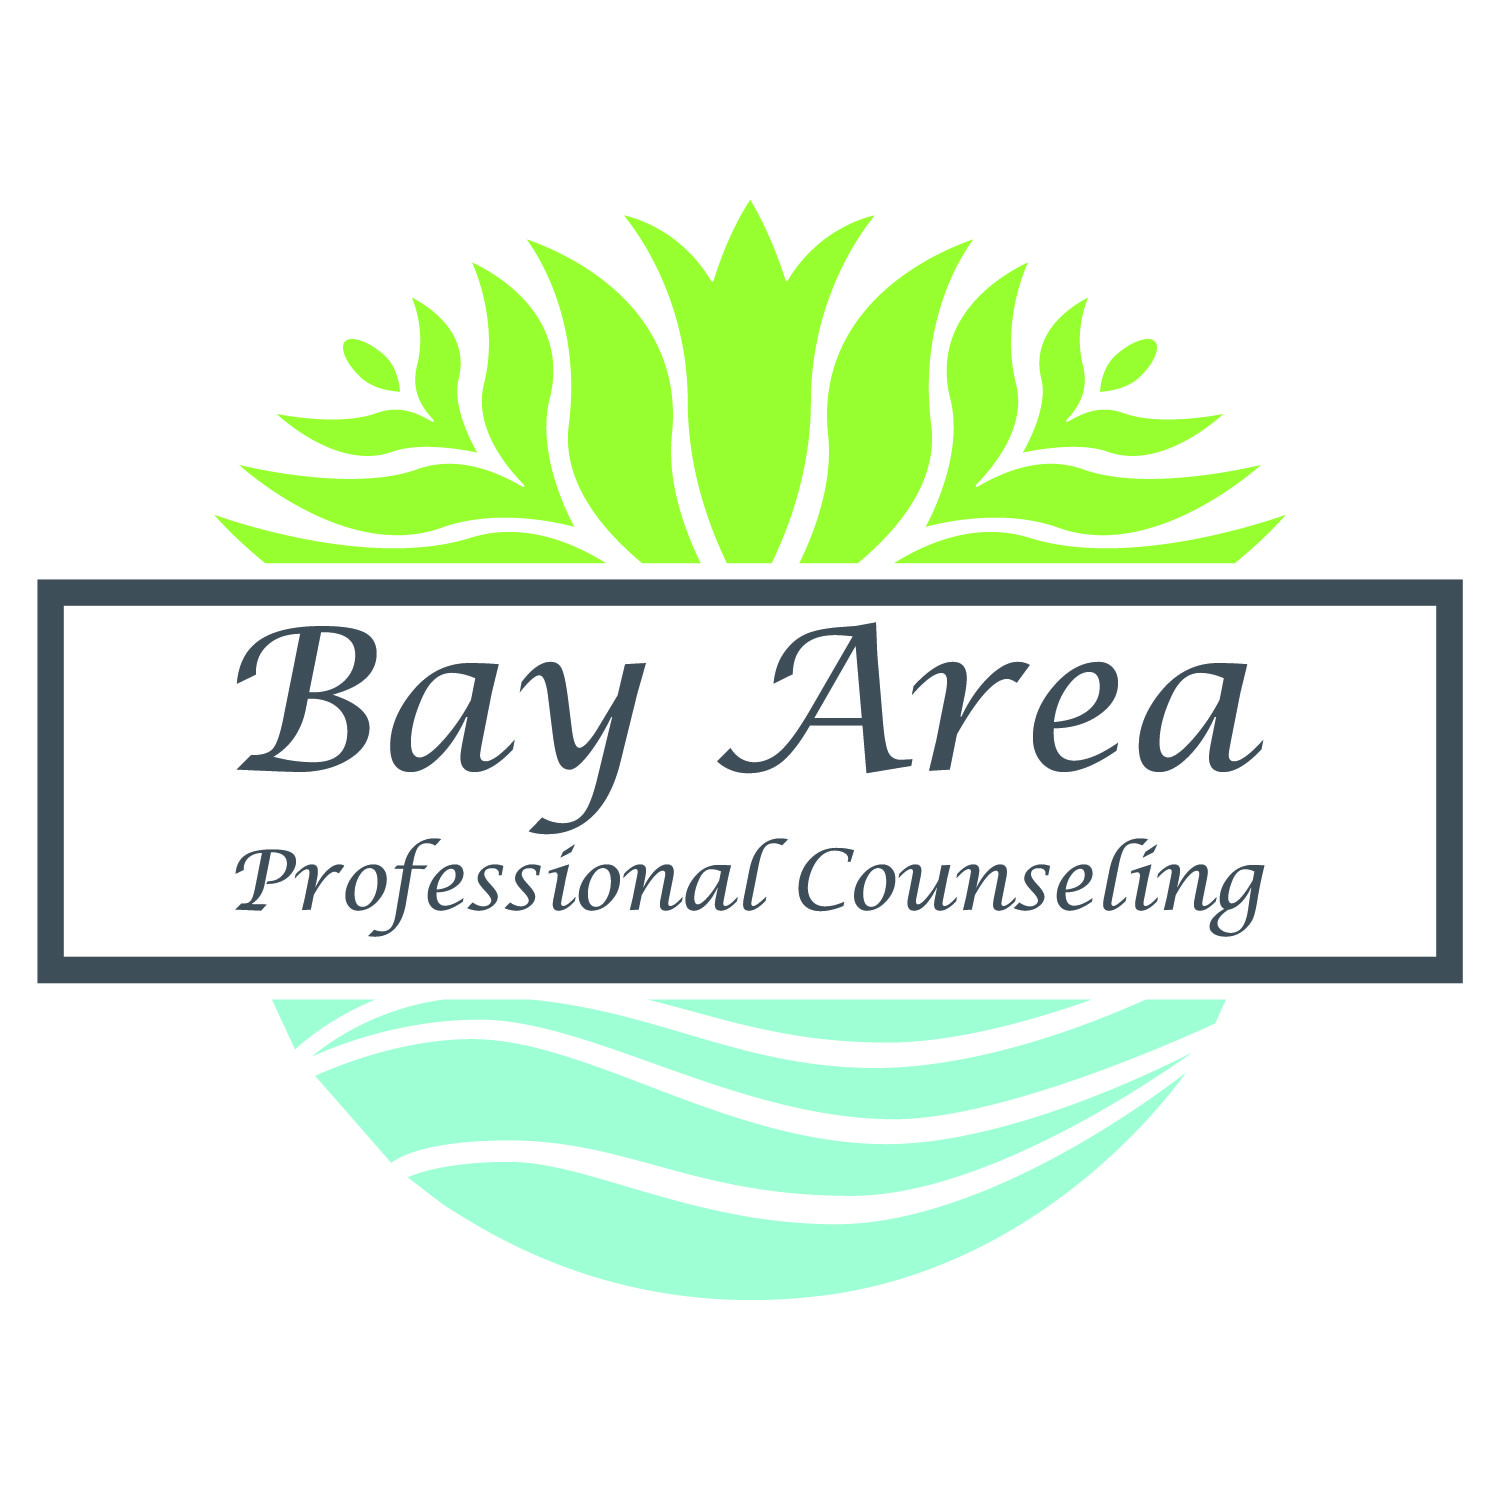 Bay Area Professional Counseling